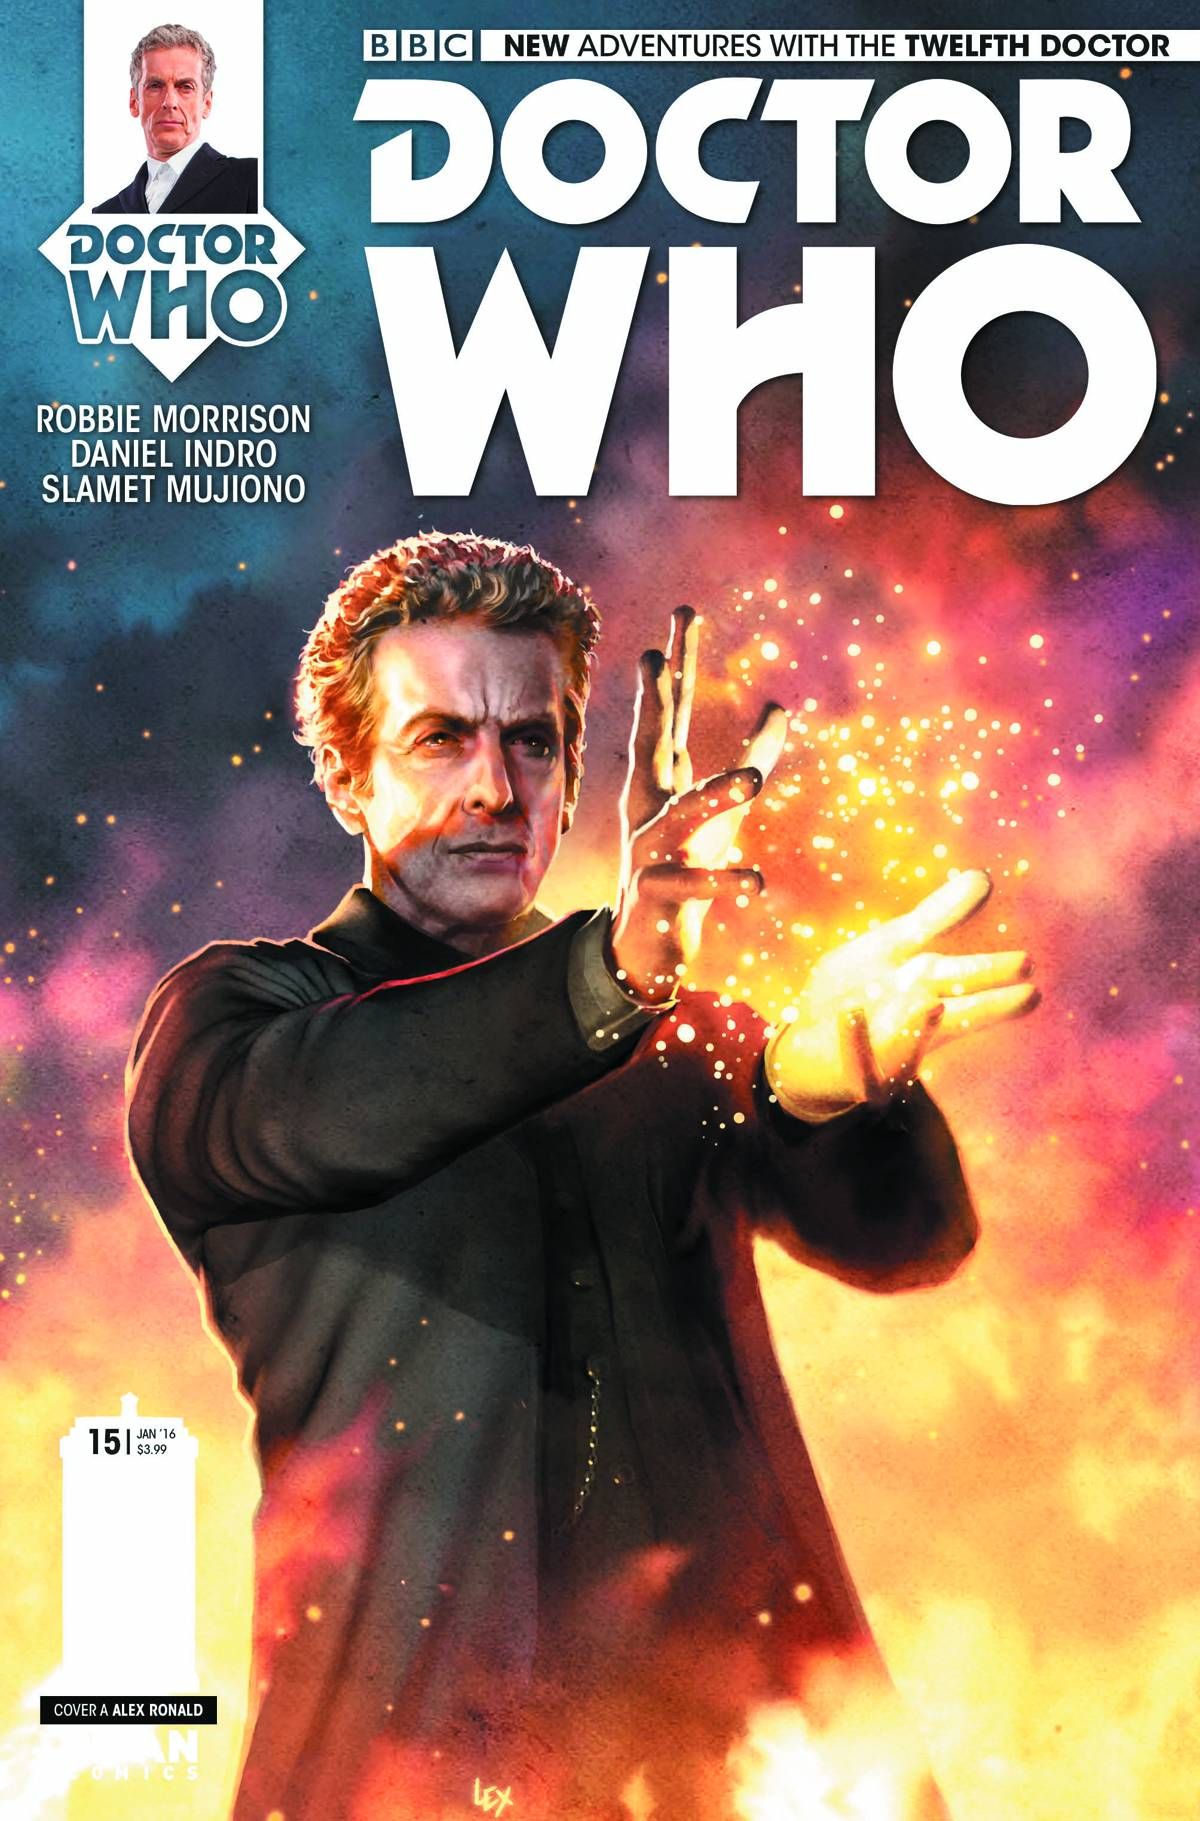 Doctor Who: The Twelfth Doctor #15 Comic